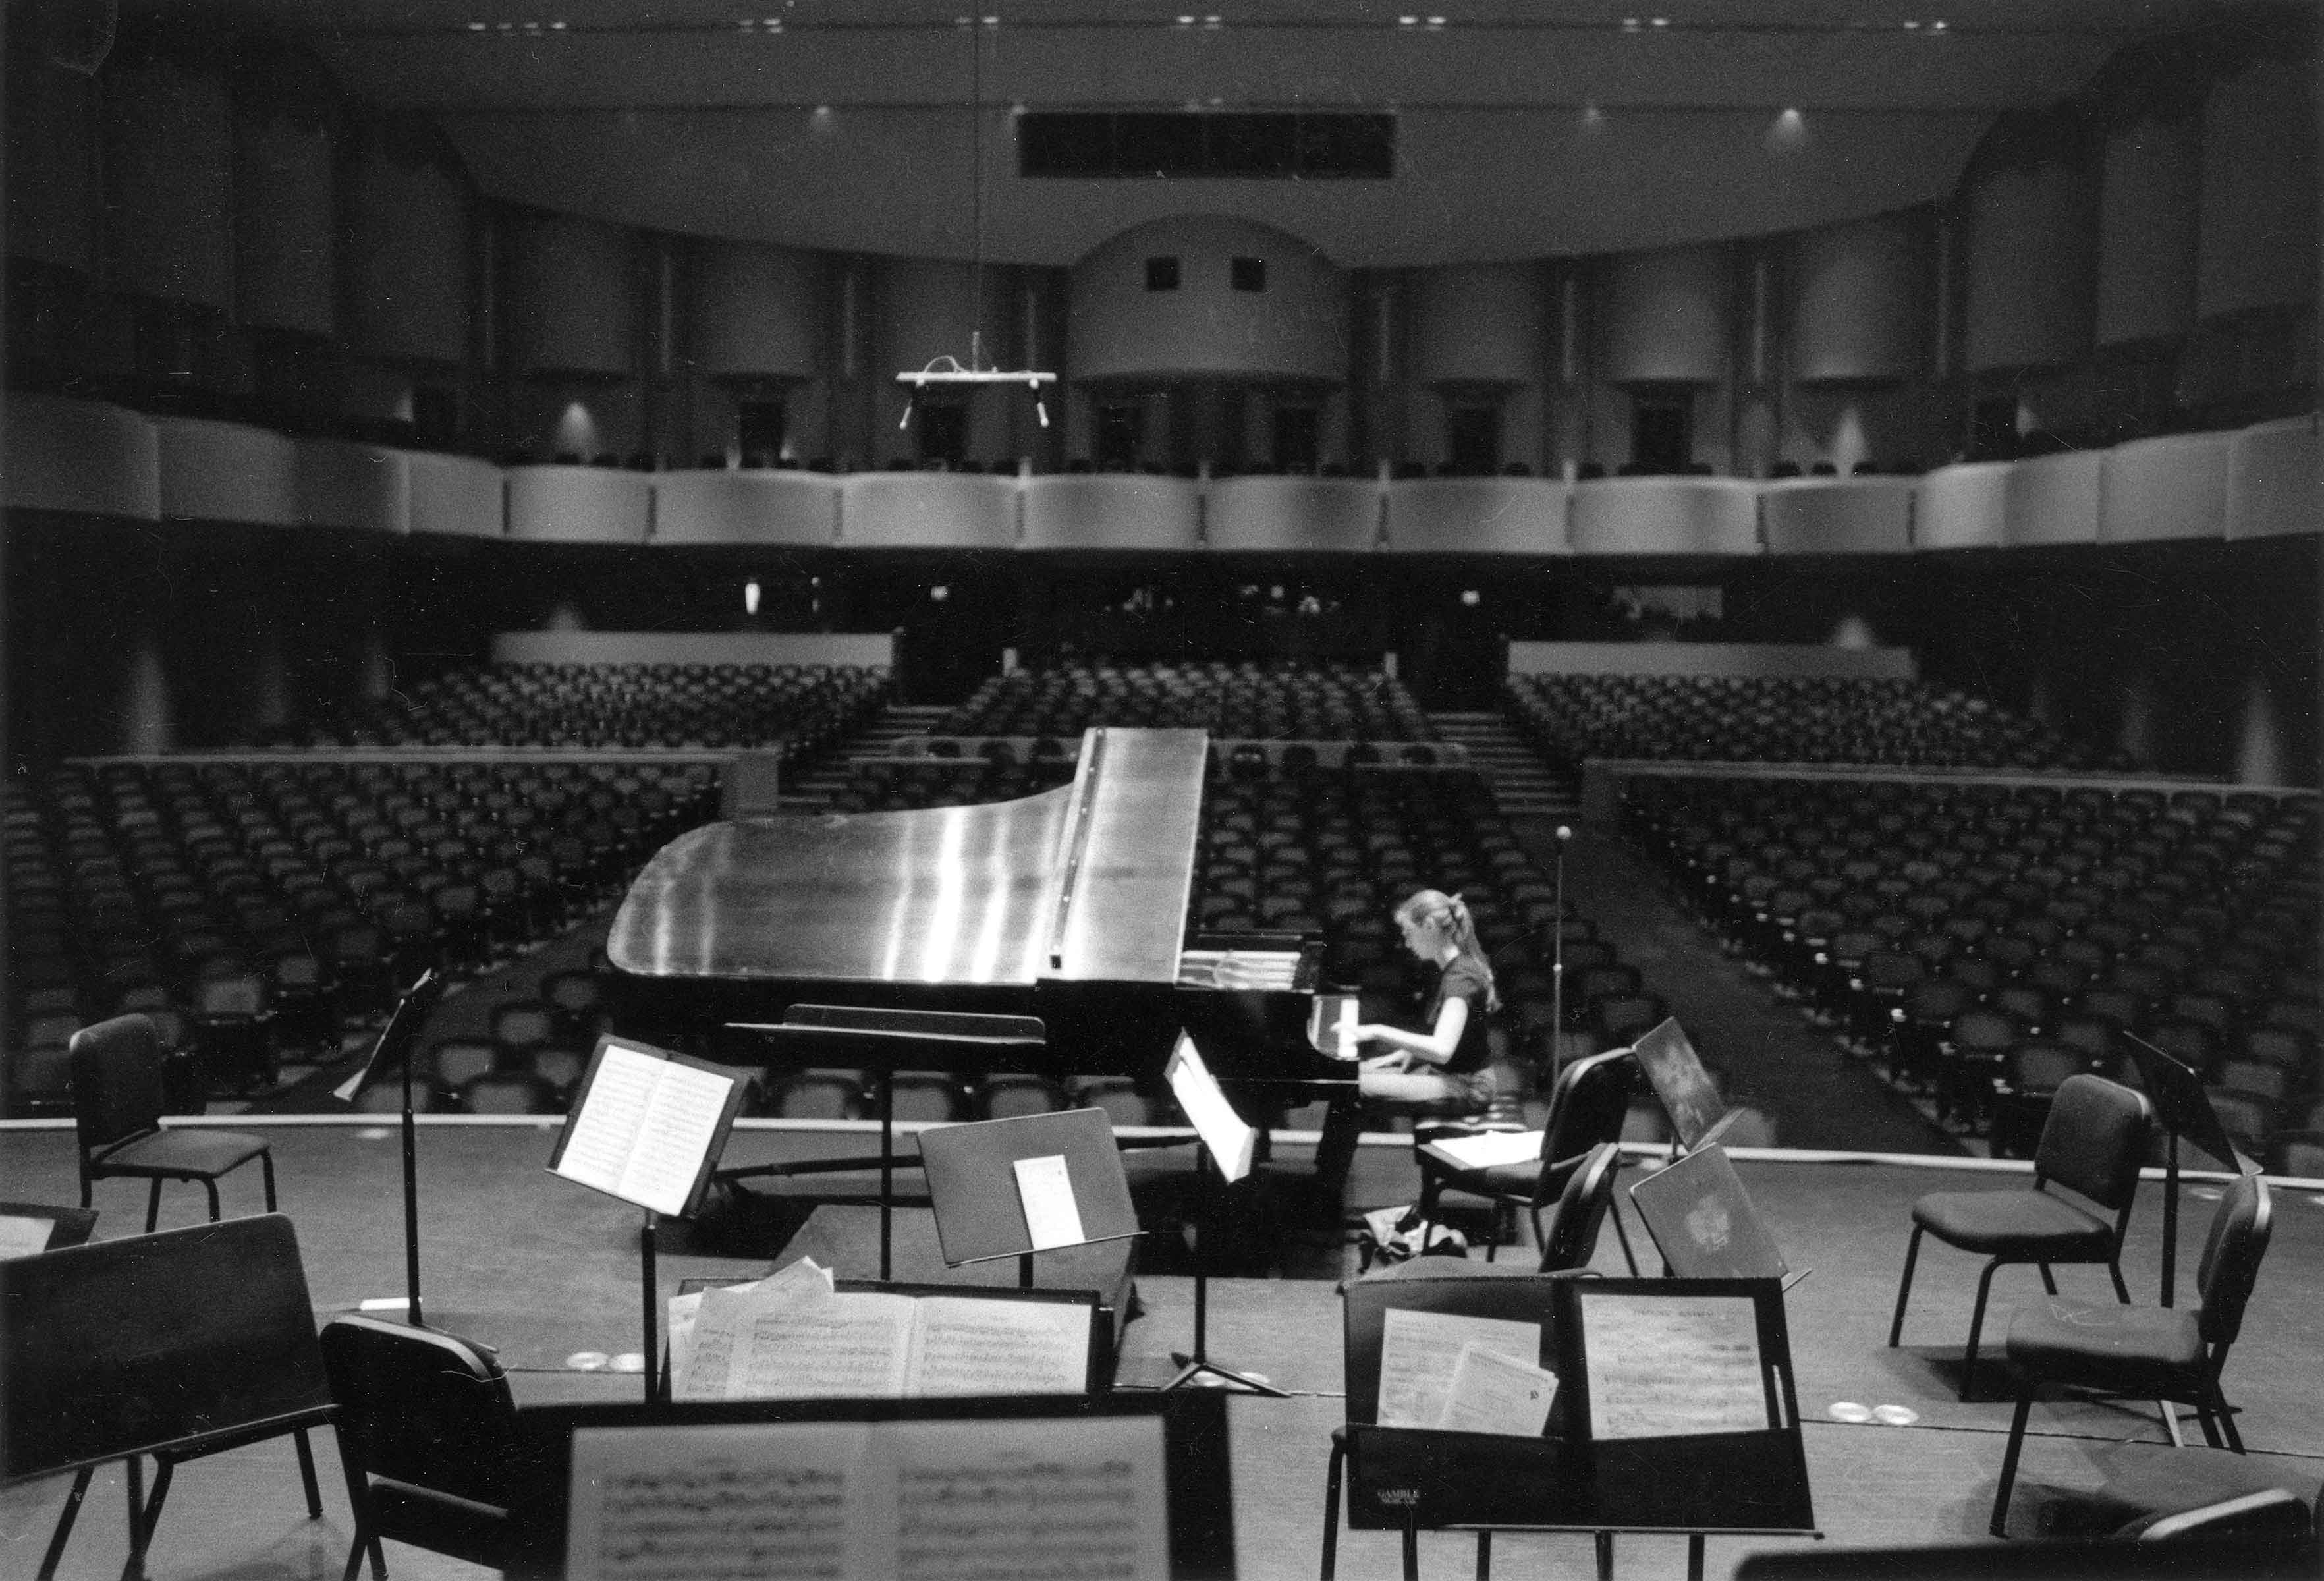 Practicing in the concert Hall